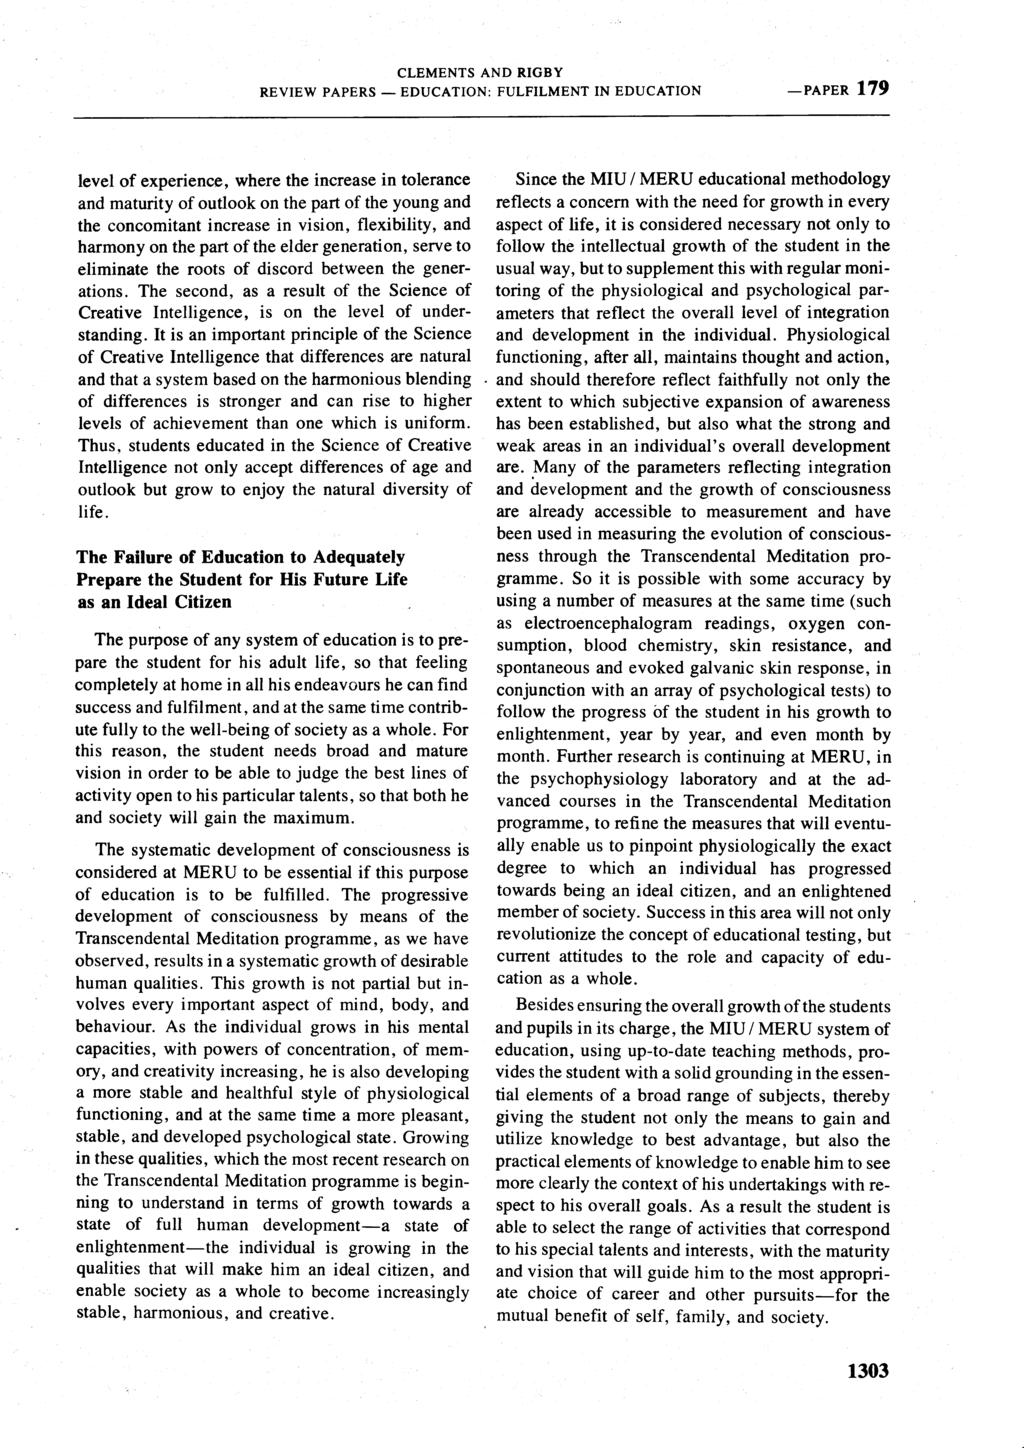 CLEMENTS AND RIGBY REVIEW PAPERS- EDUCATION: FULFILMENT IN EDUCATION -PAPER 179 level of experience, where the increase in tolerance and maturity of outlook on the part of the young and the